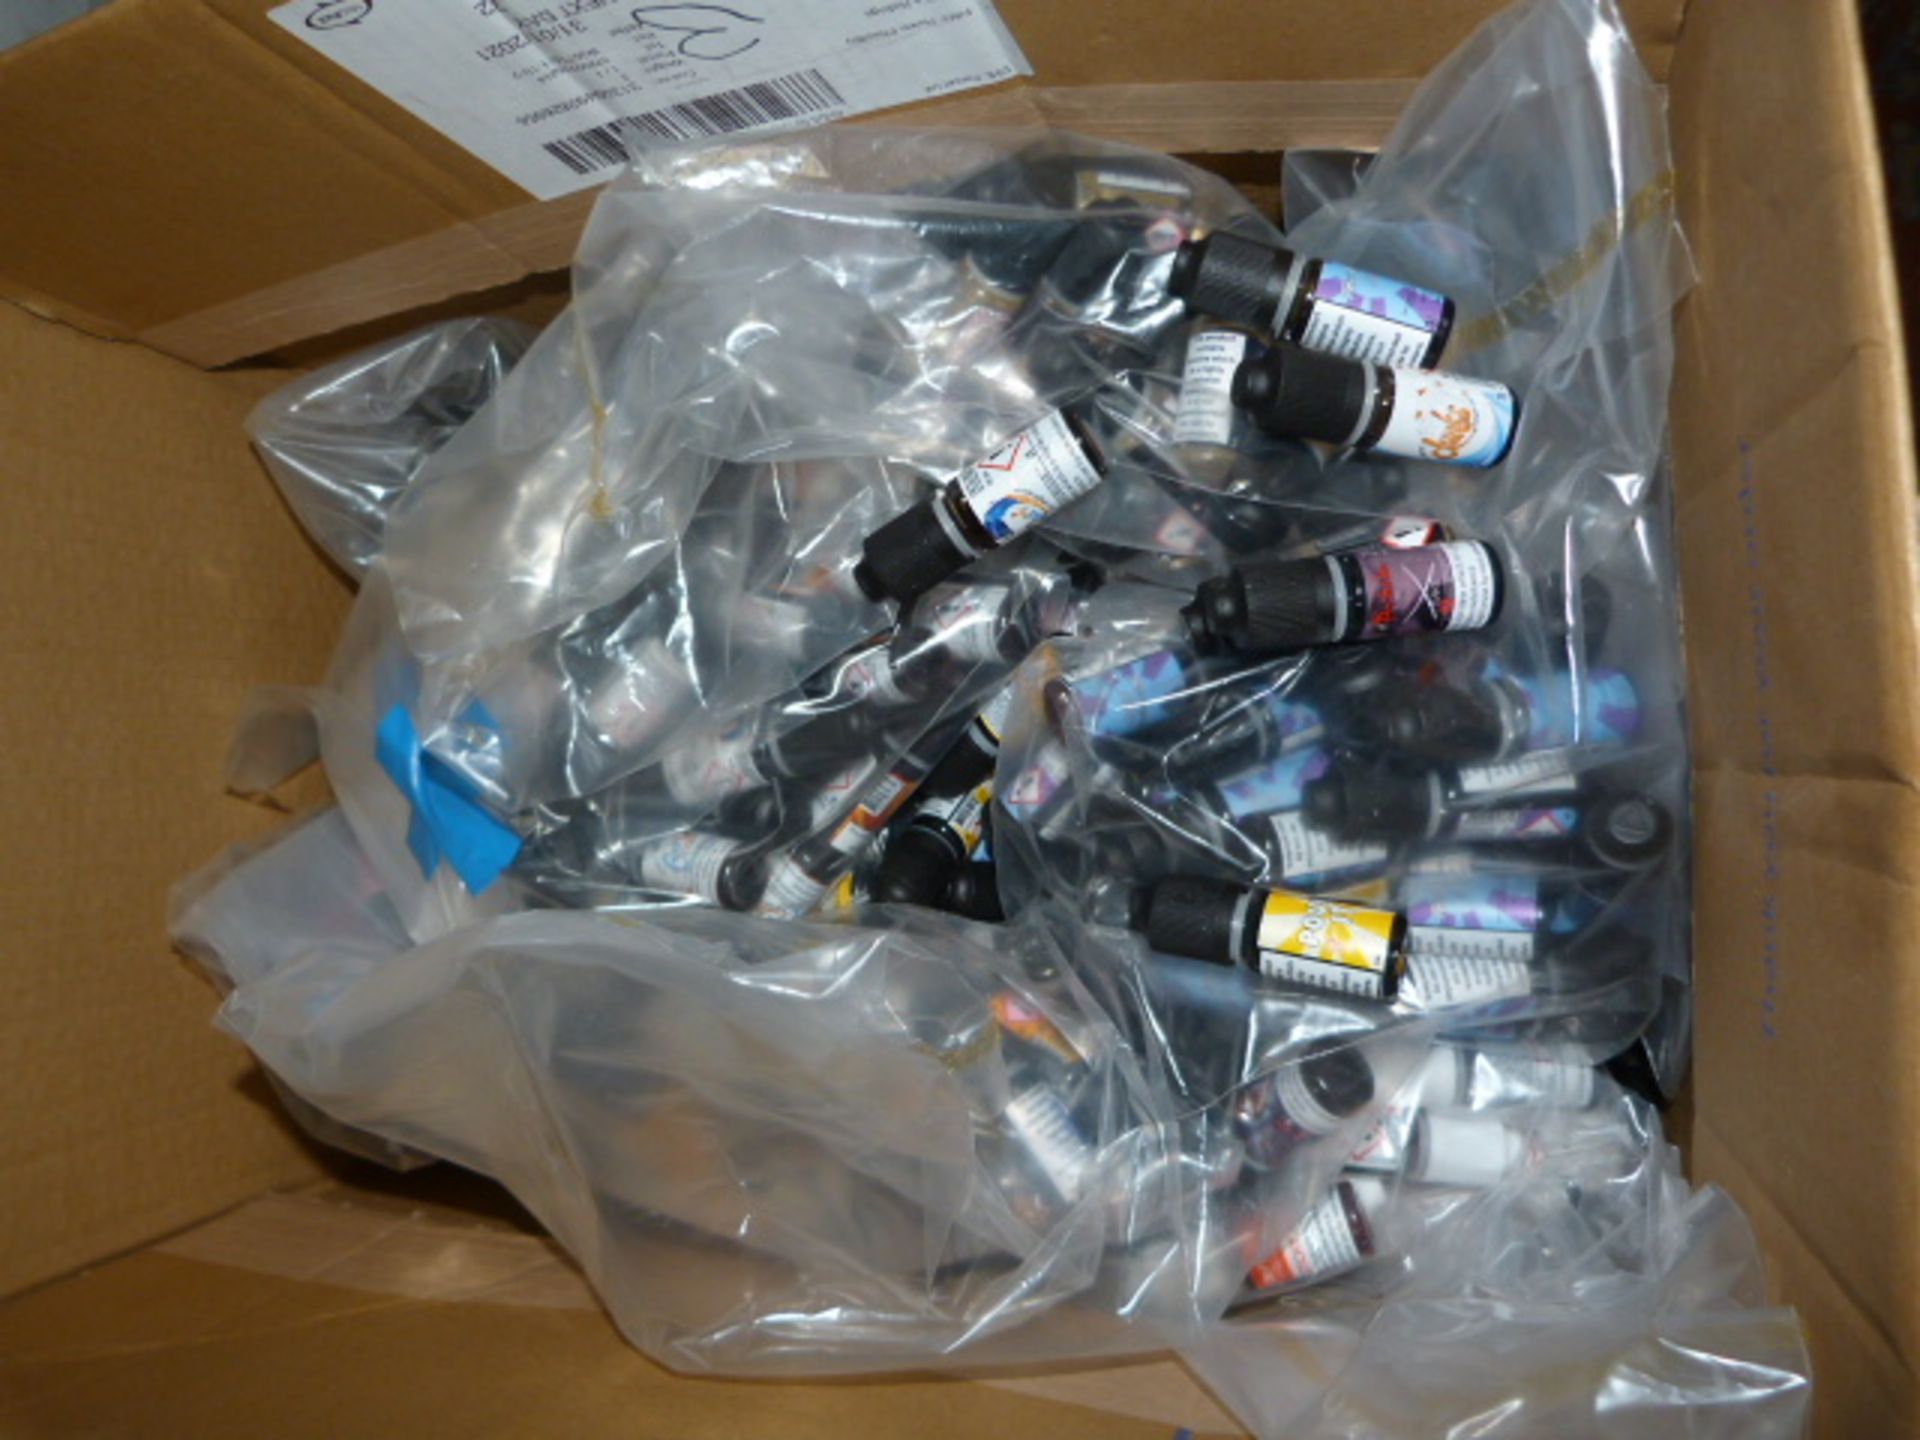 Large Box of Vape Refills (Contains Nicotine)